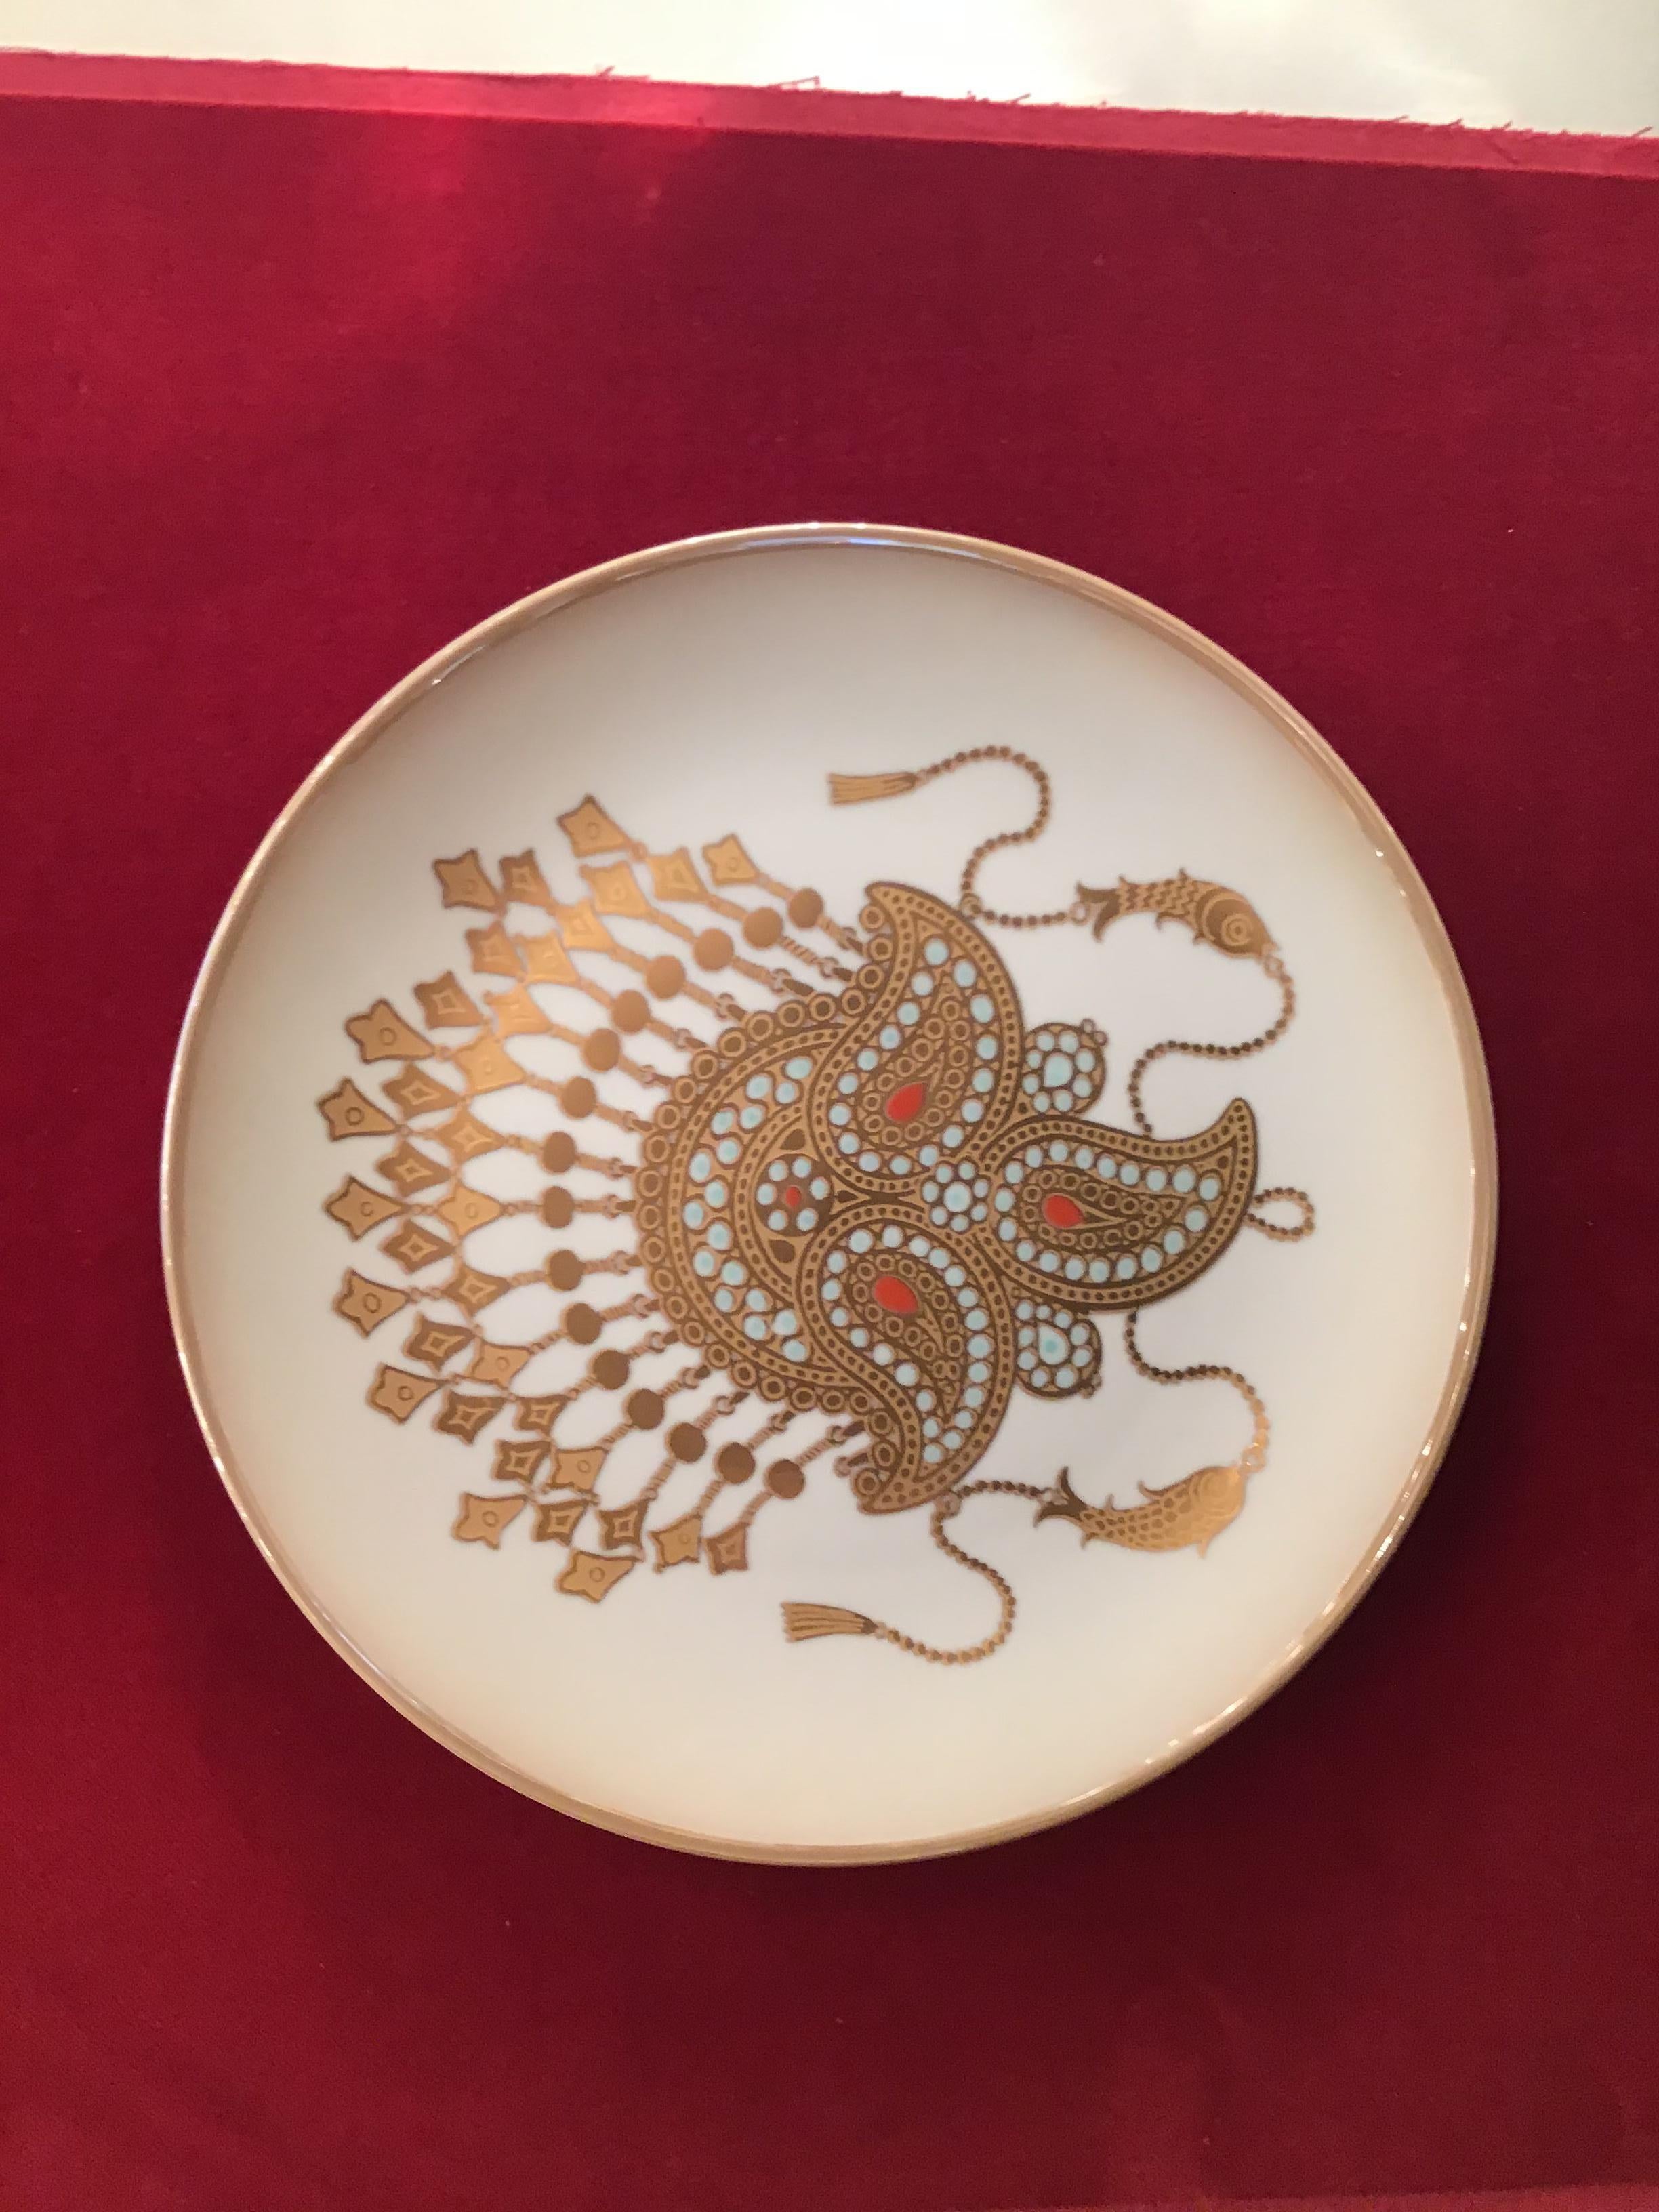 Morbelli Porcelain Wall Plates Worked with Pure Gold 1960 Italy In Excellent Condition For Sale In Milano, IT